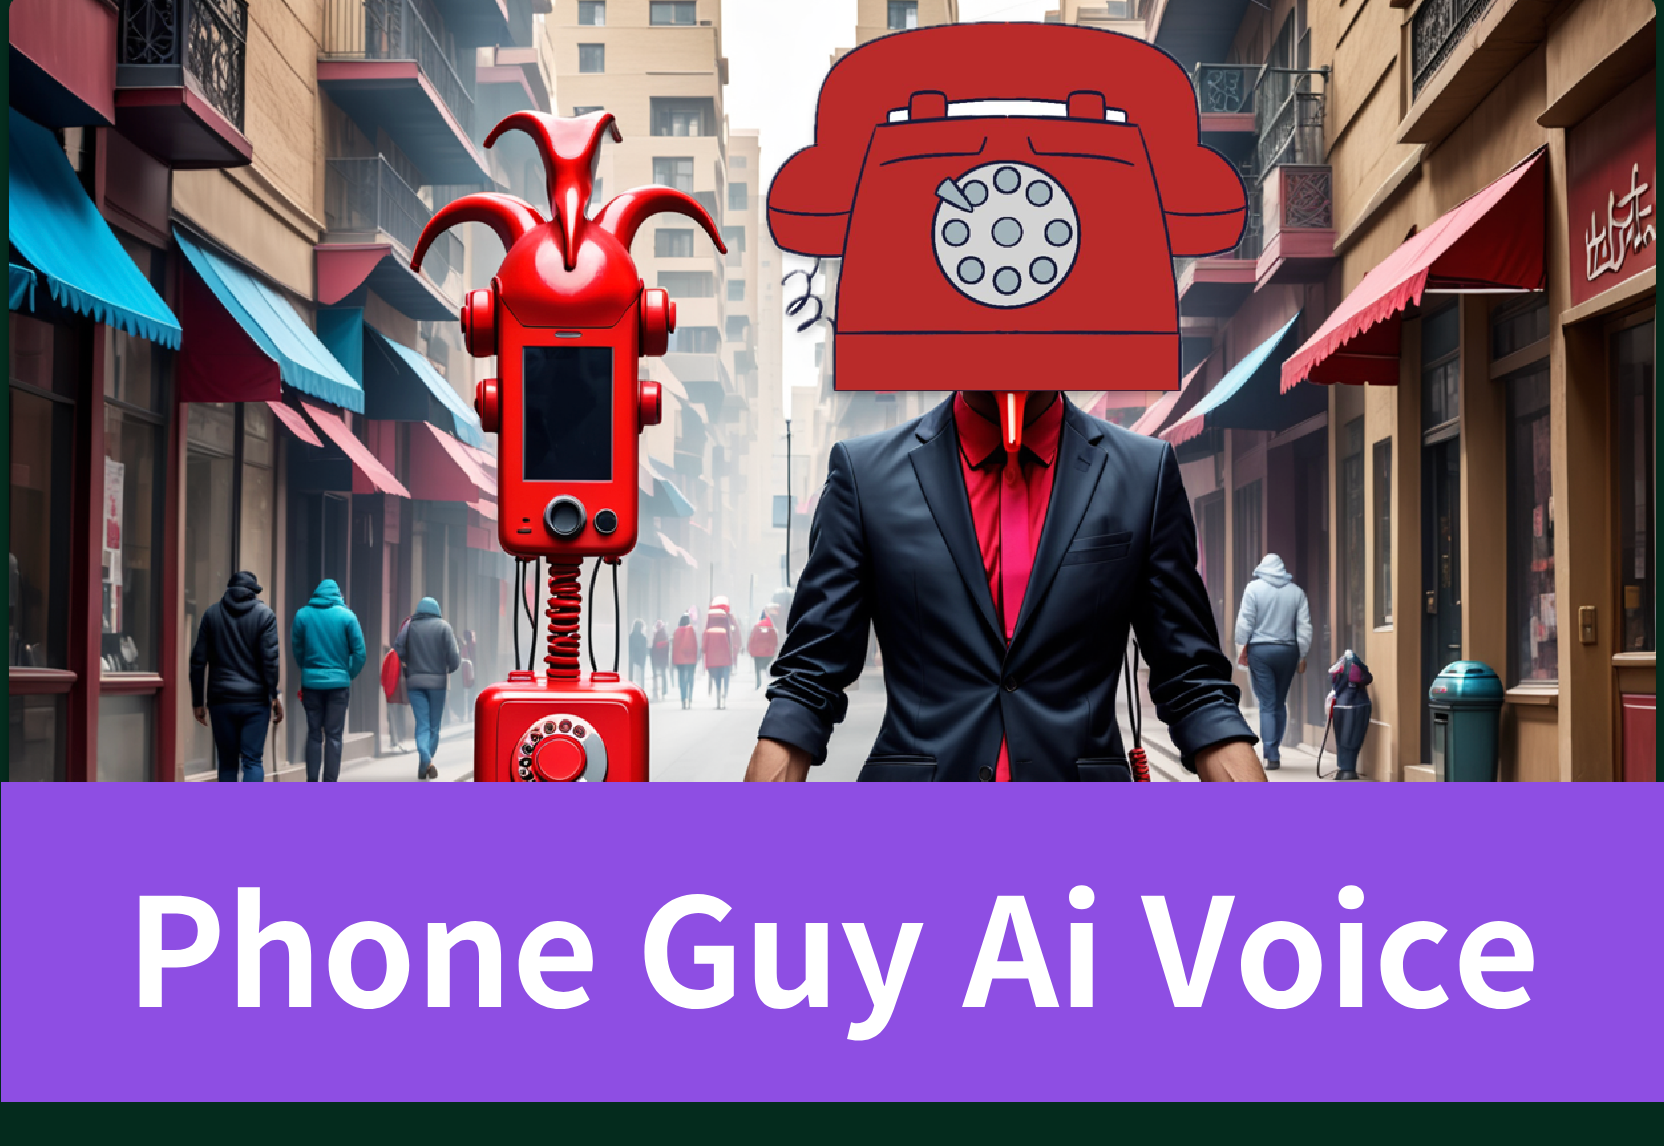 Phone Guy AI Voice: The Role of Voice Acting in Gaming